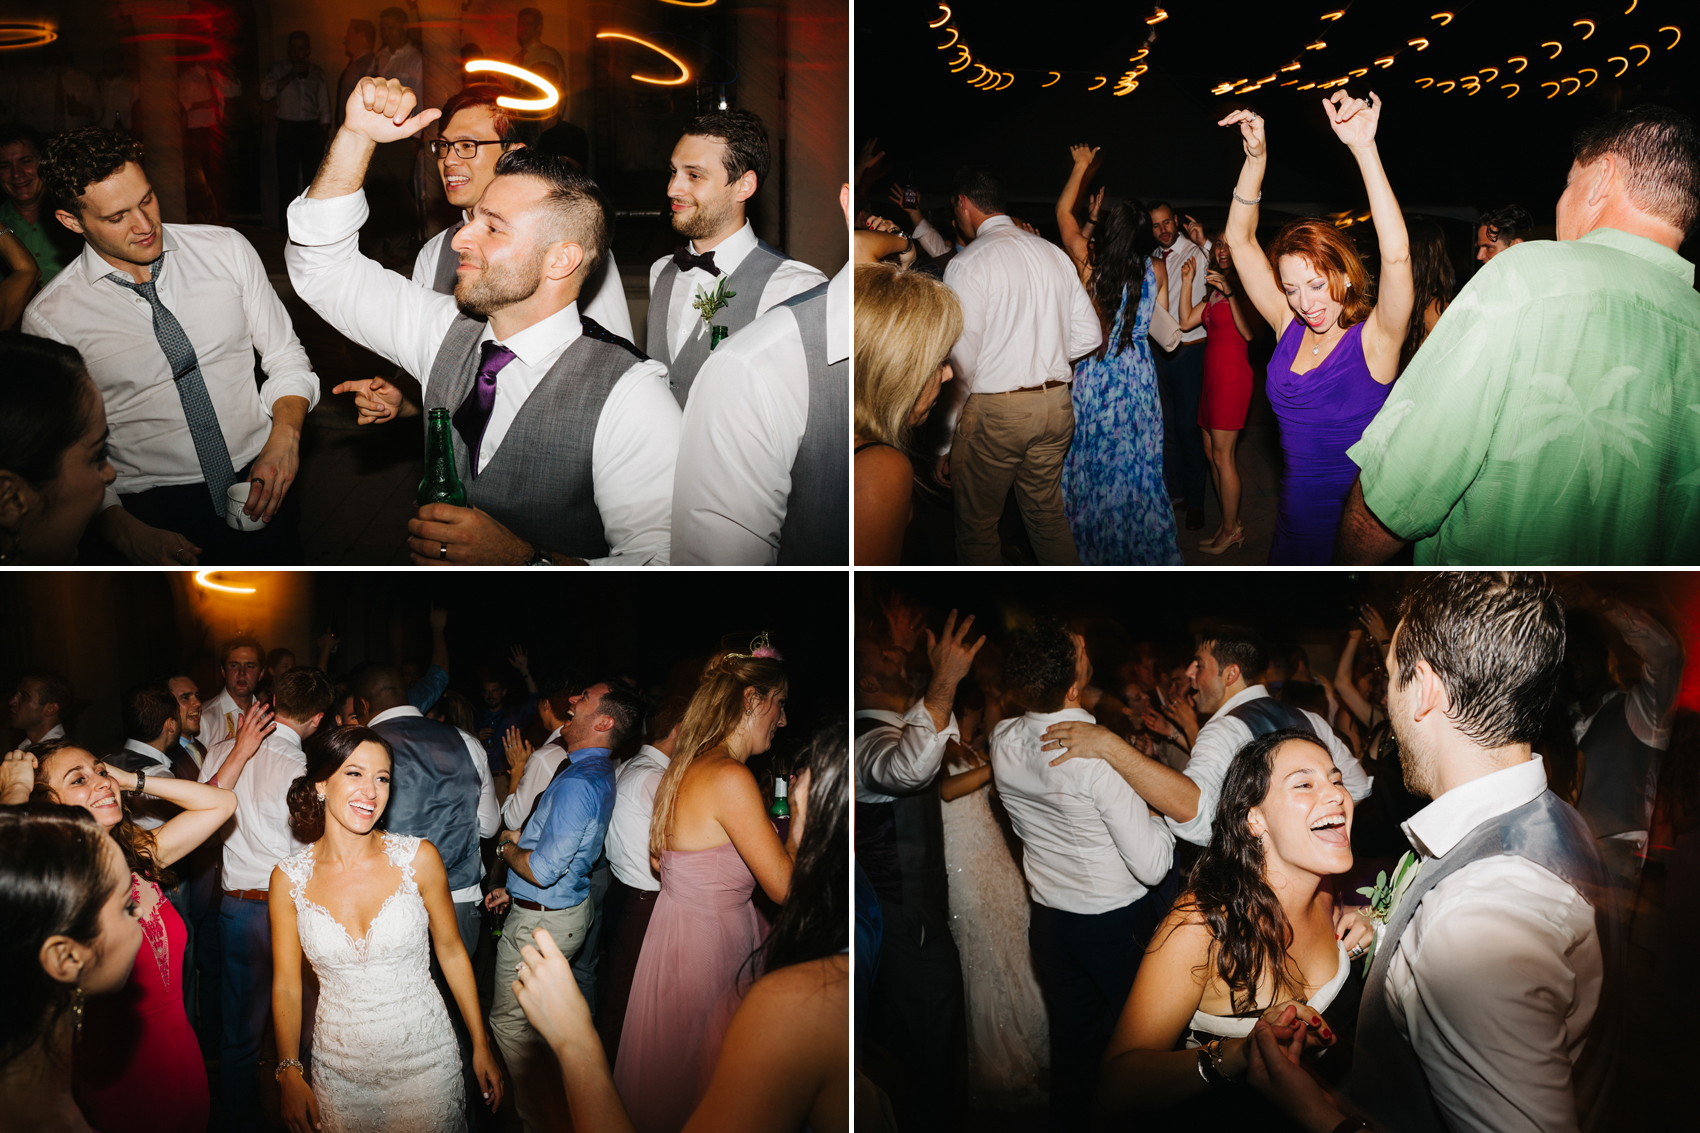 Dancing and partying at the Powel Crosley wedding